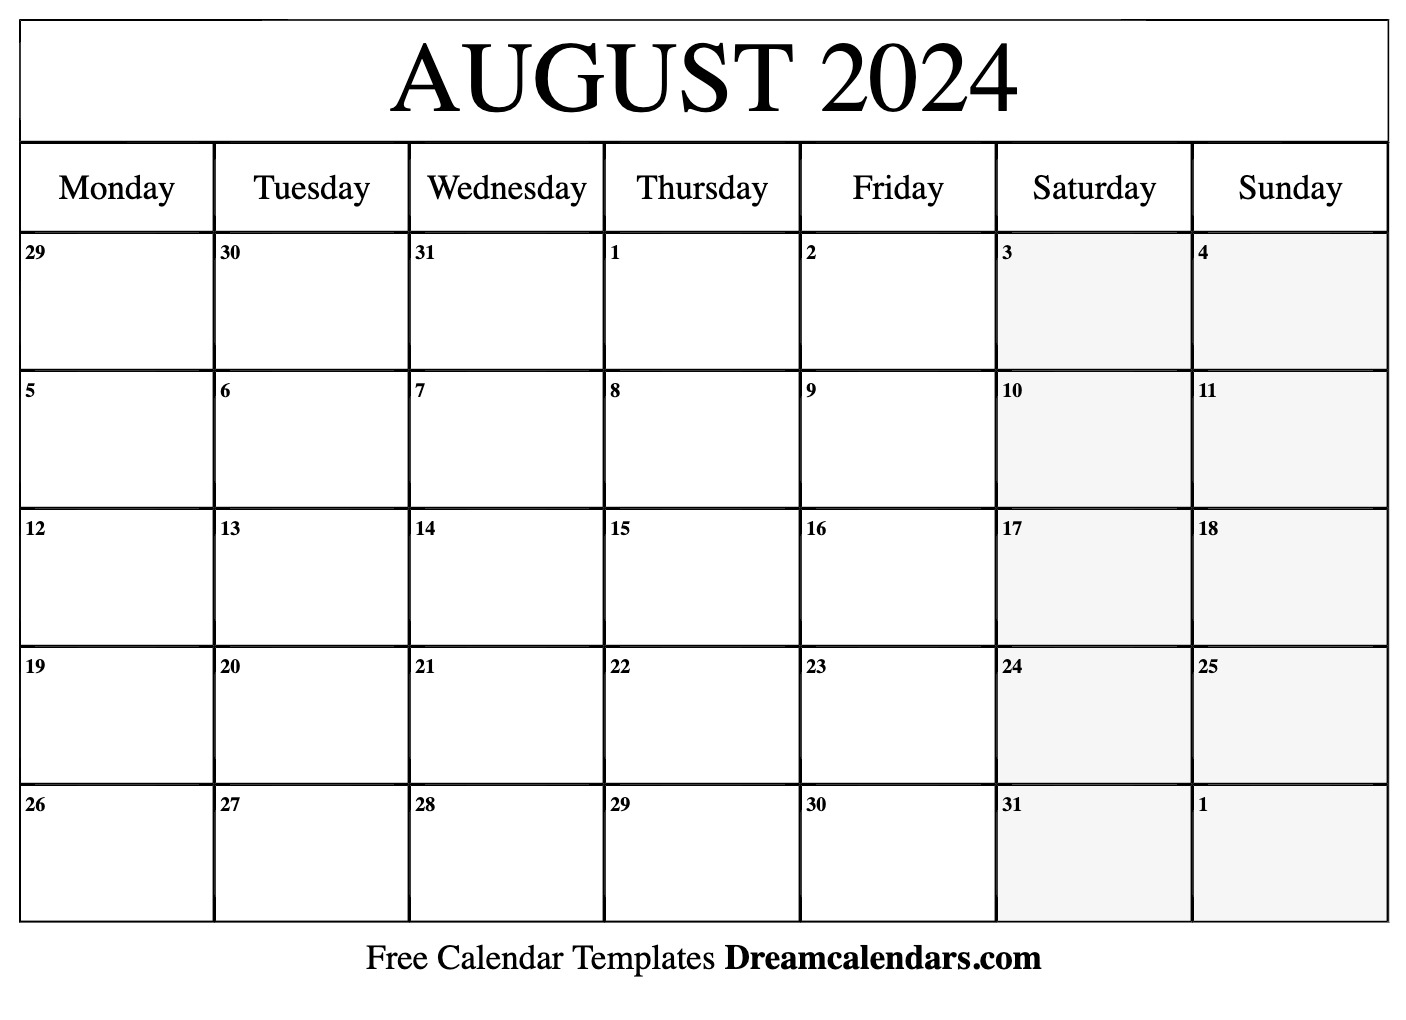 August 2024 Calendar | Free Blank Printable With Holidays for August 2024 Free Printable Calendar